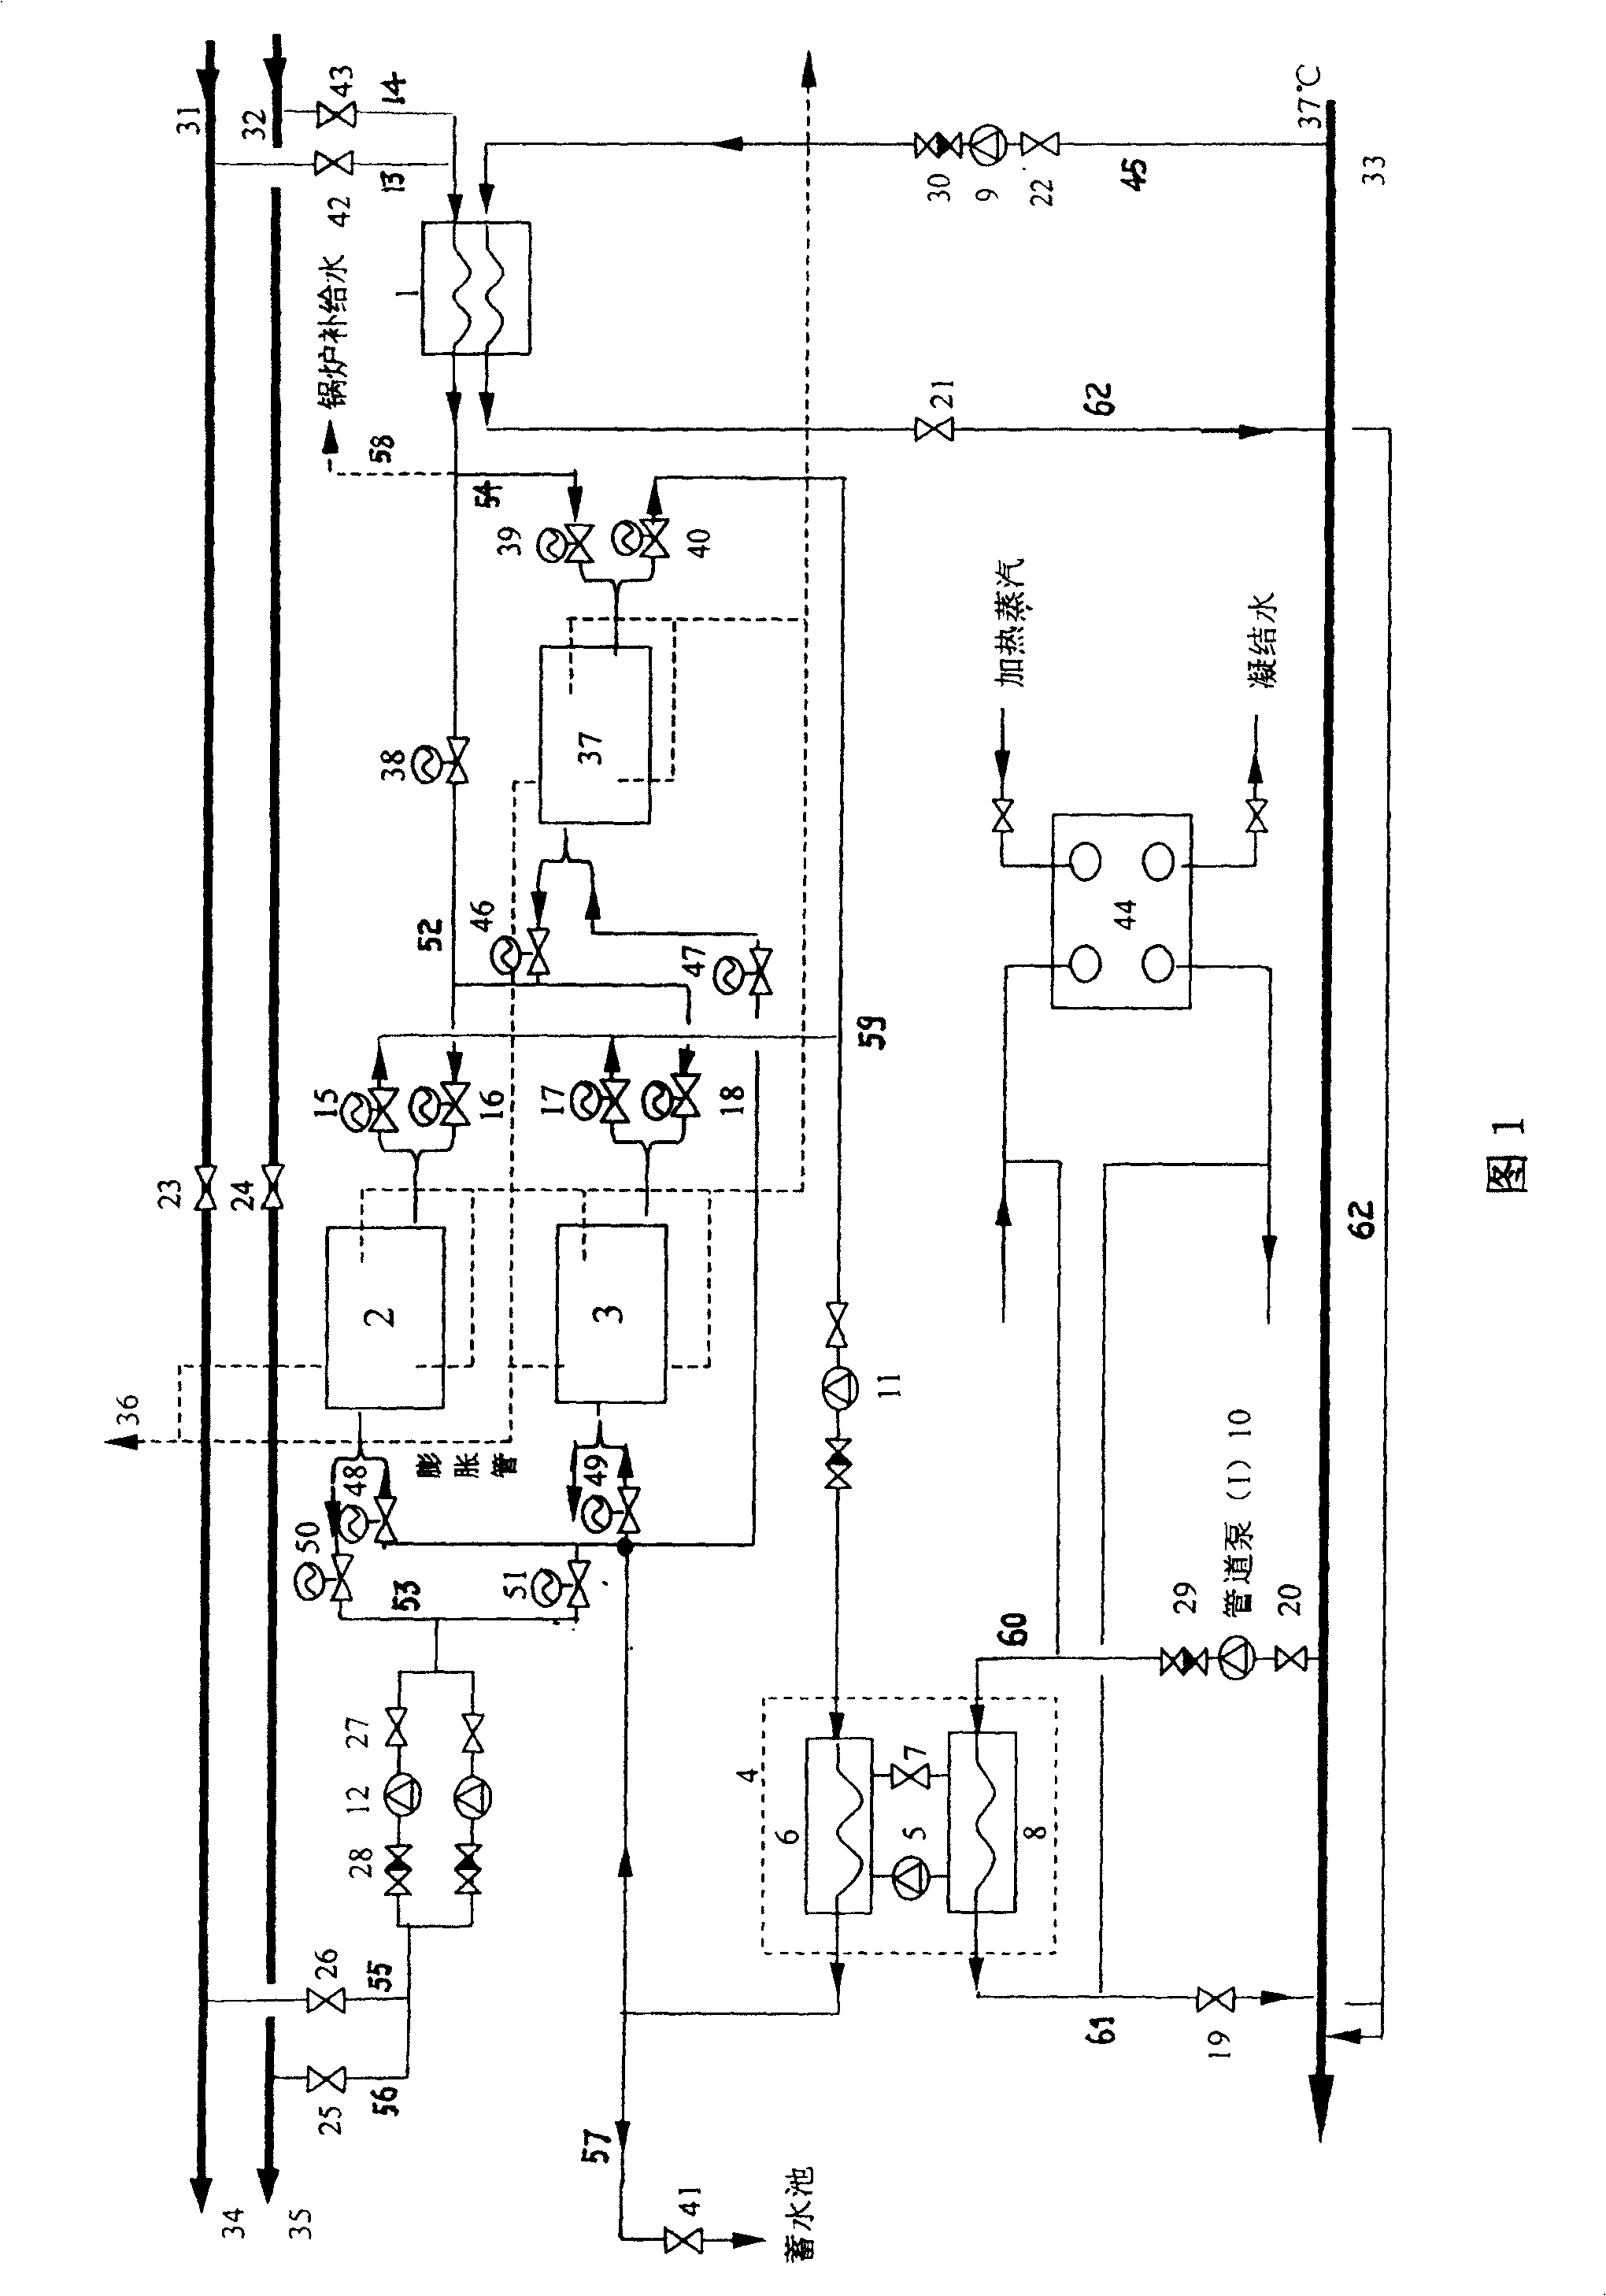 Condensation heat recovery apparatus and method for downfeed type hot water supply circulation system